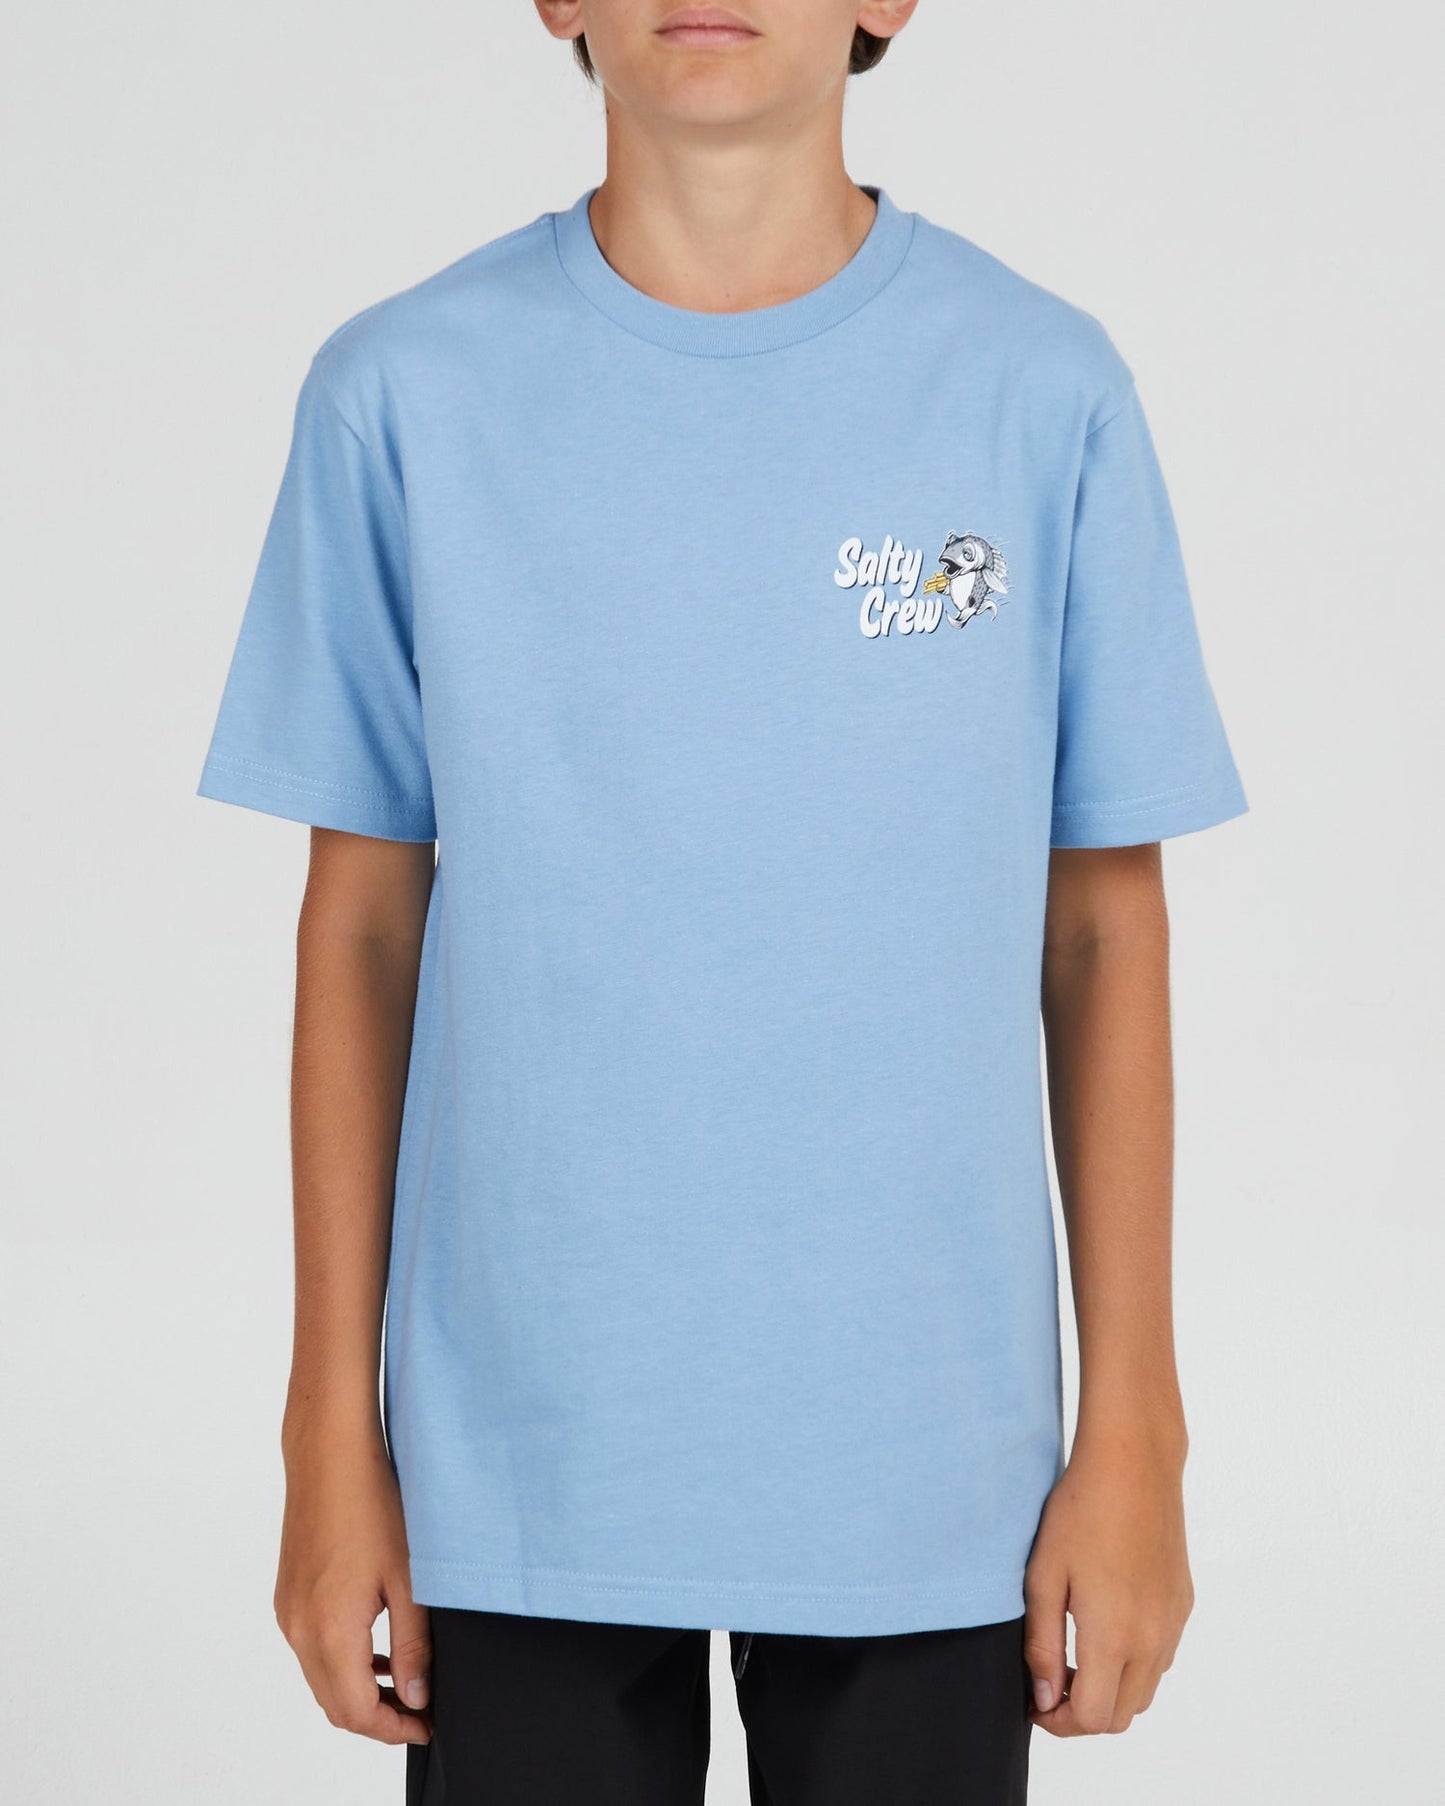 Salty Crew Fish and Chips Boys S/s Tee - Light Blue Boys T Shirt